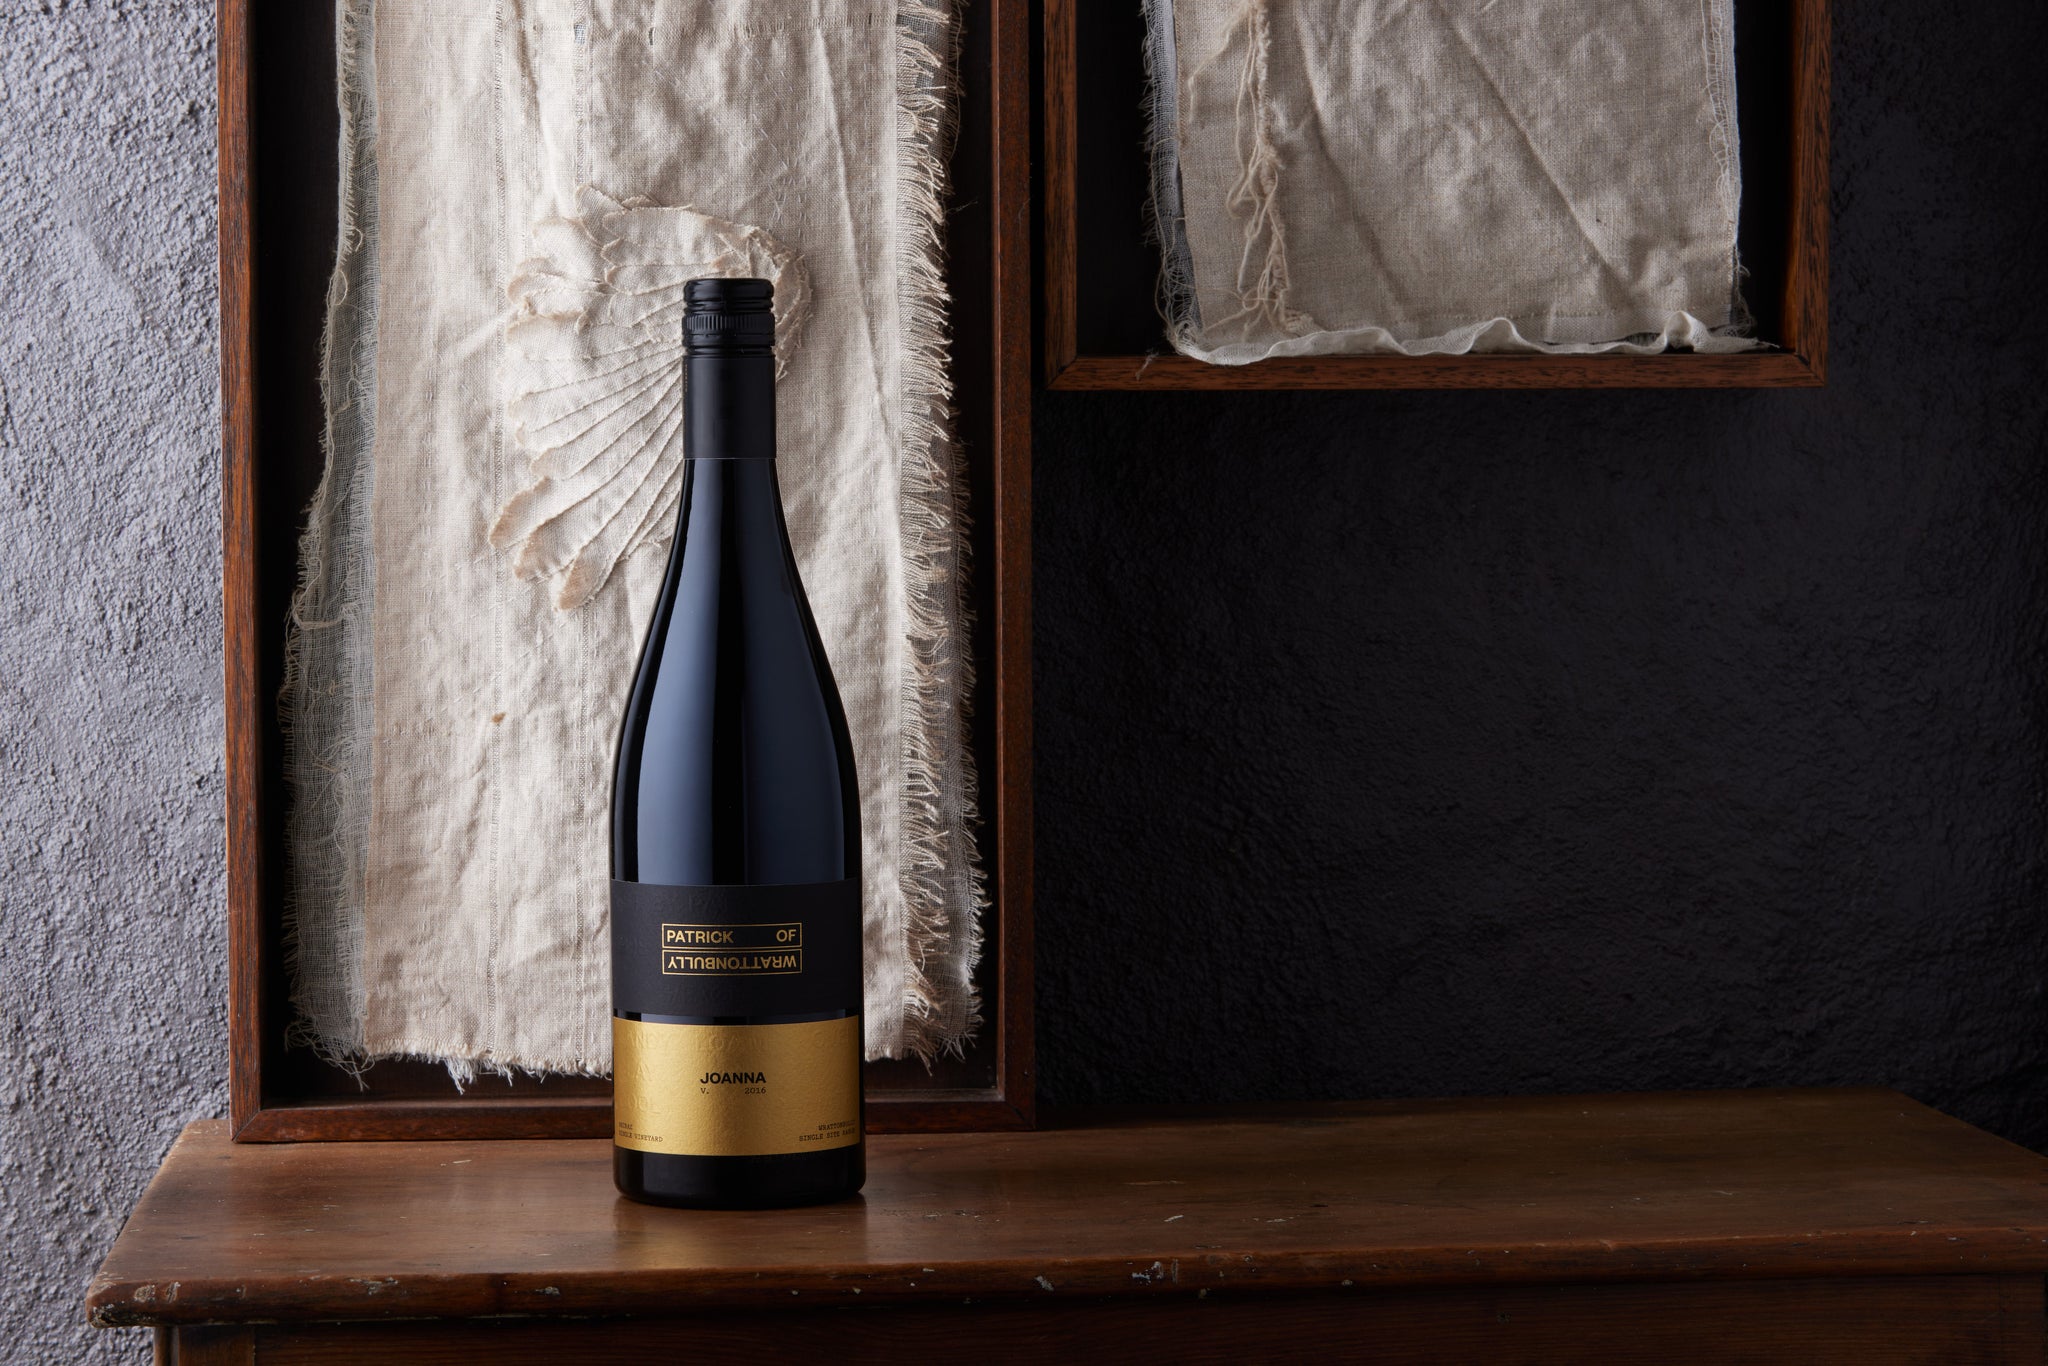 Bottle of wine with a black and gold label in front of a linen and wood background.